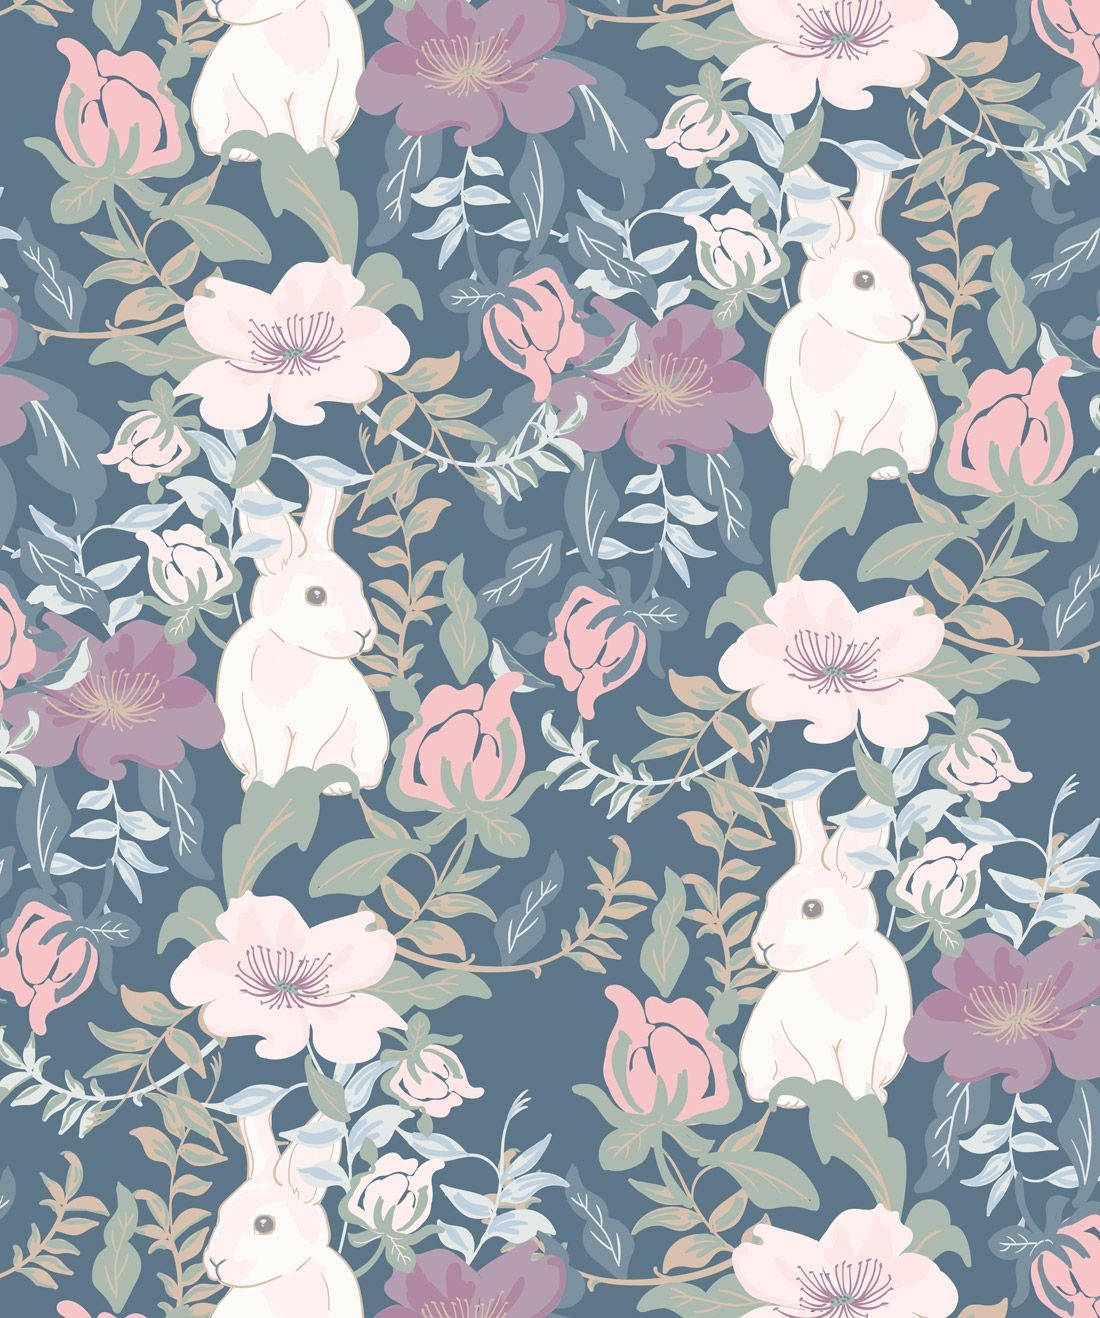 Cute Bunny On Floral Design Wallpaper